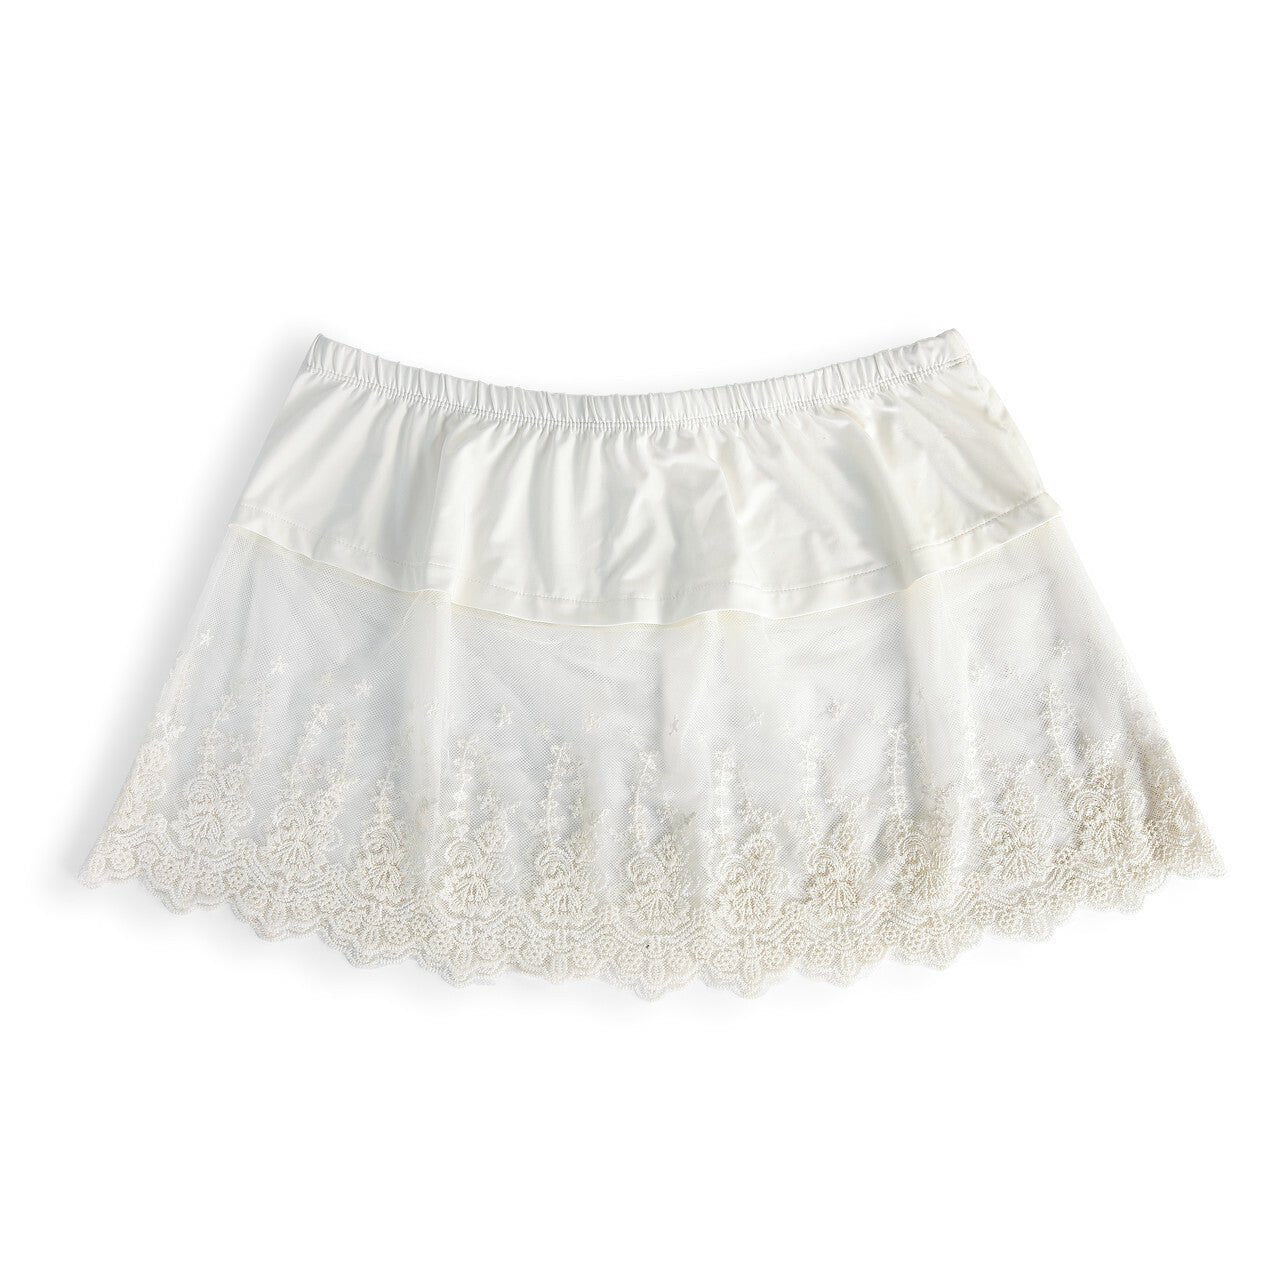 White Lace Shirt Extender